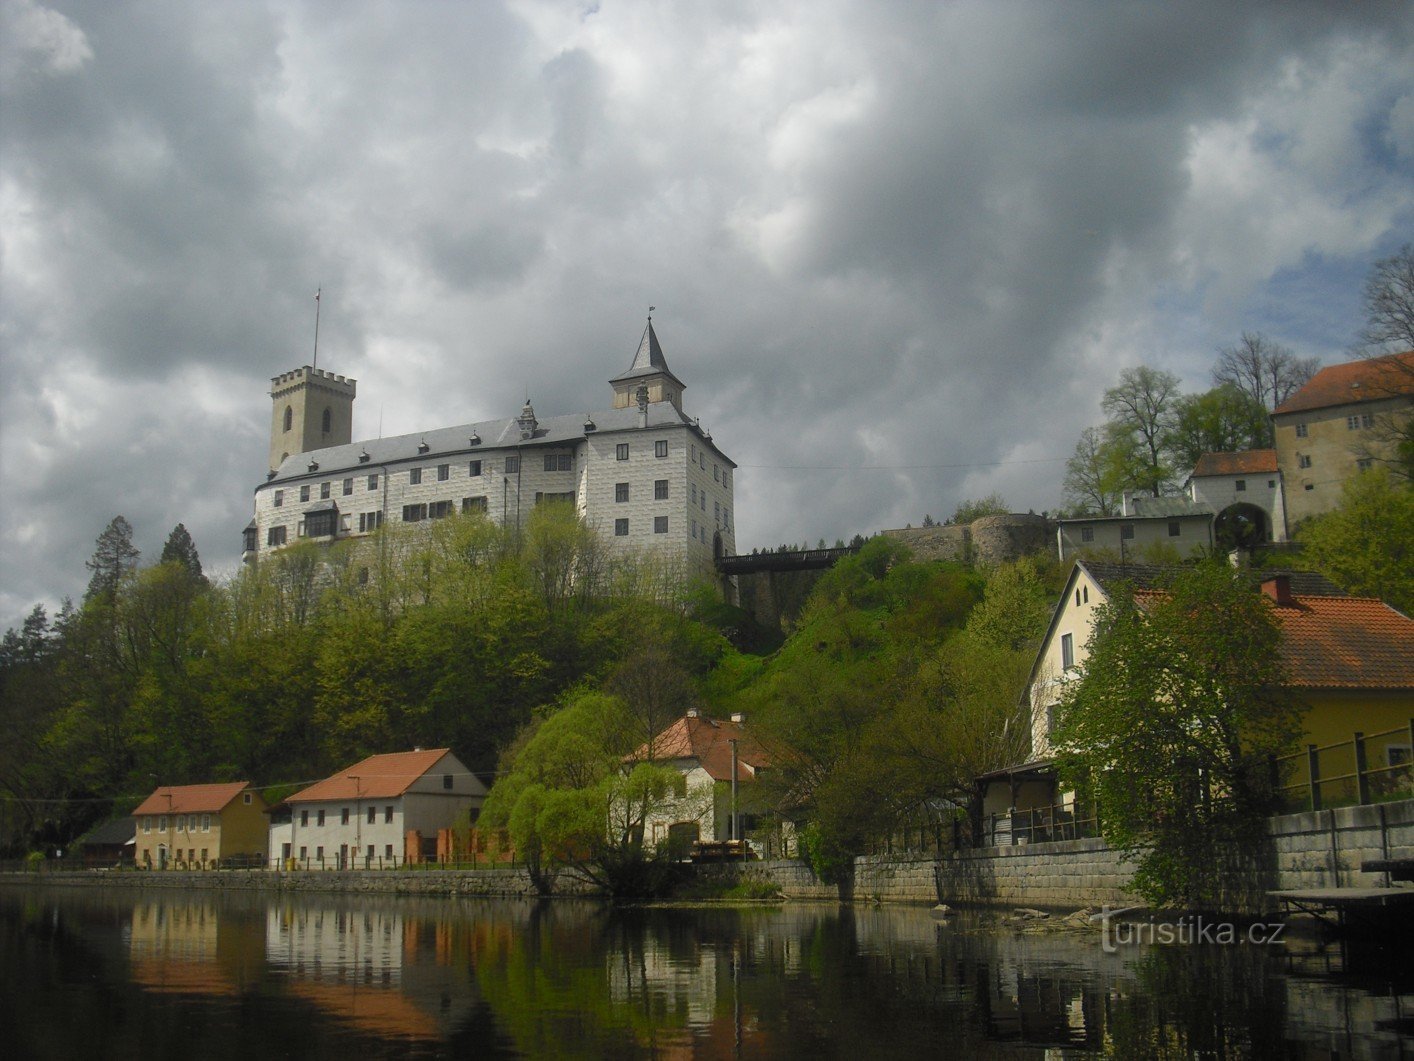 Rožmberk and one of the oldest castles of the Vítkov family